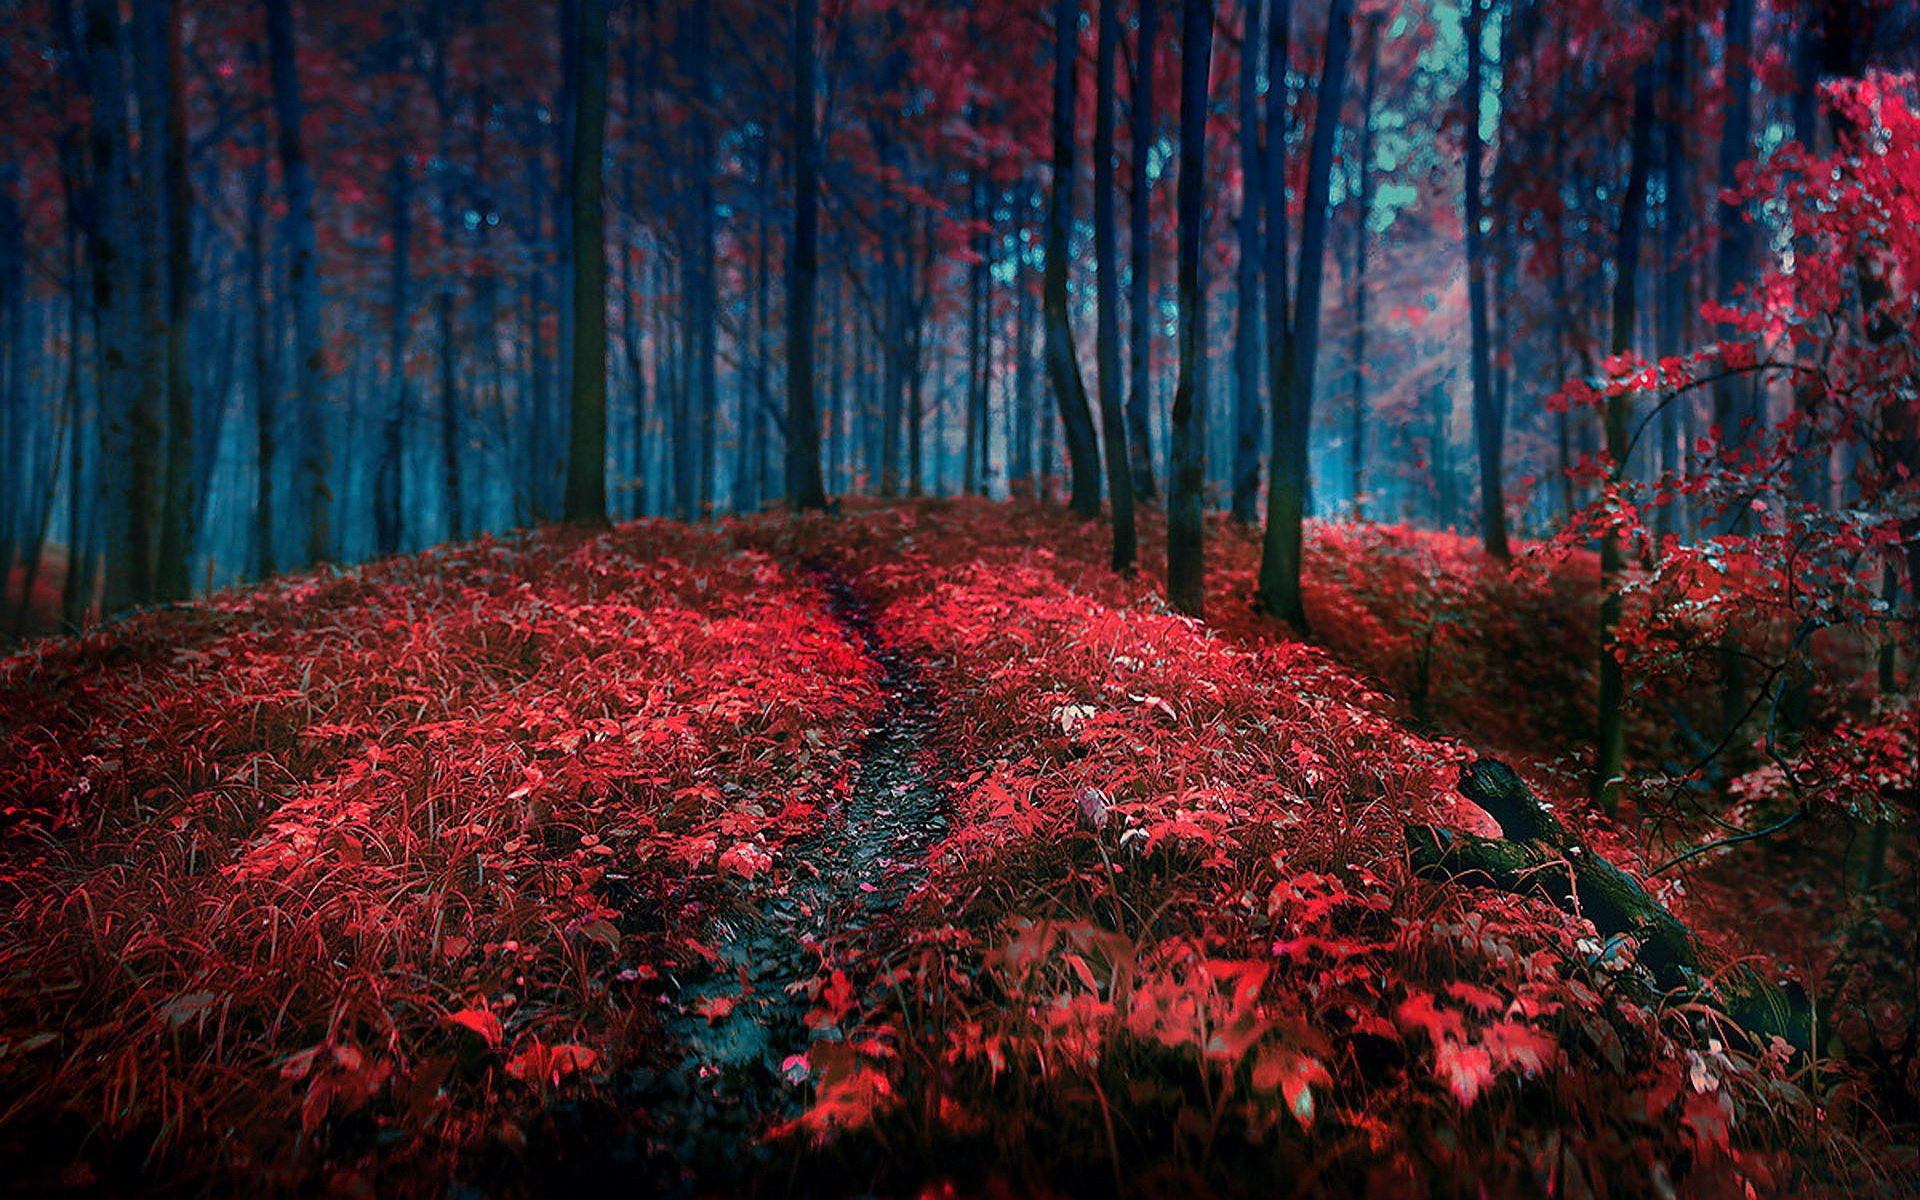 HD desktop wallpaper featuring a vibrant, mystical forest with a trail amid red foliage under blue-toned trees.